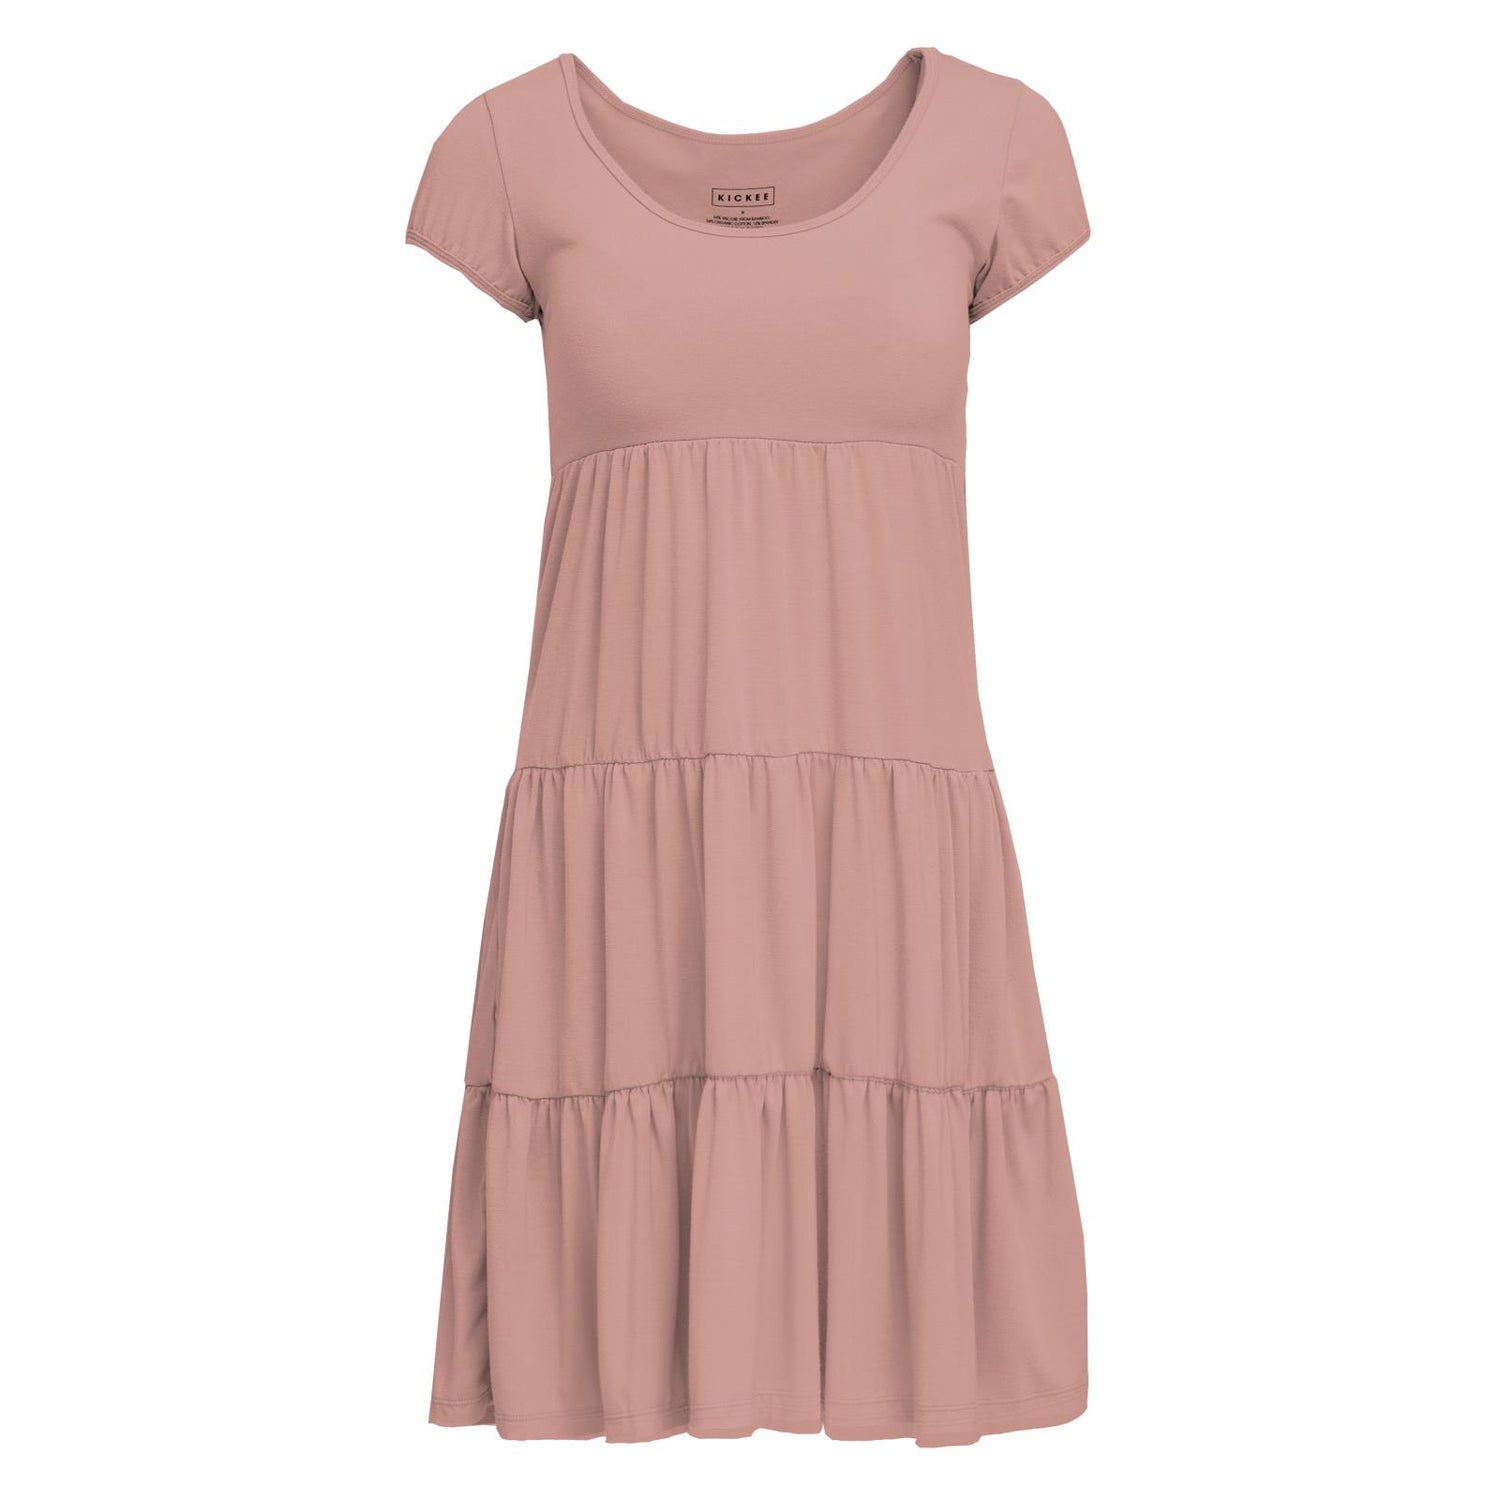 Women's Sundress with Luxe Top in Blush